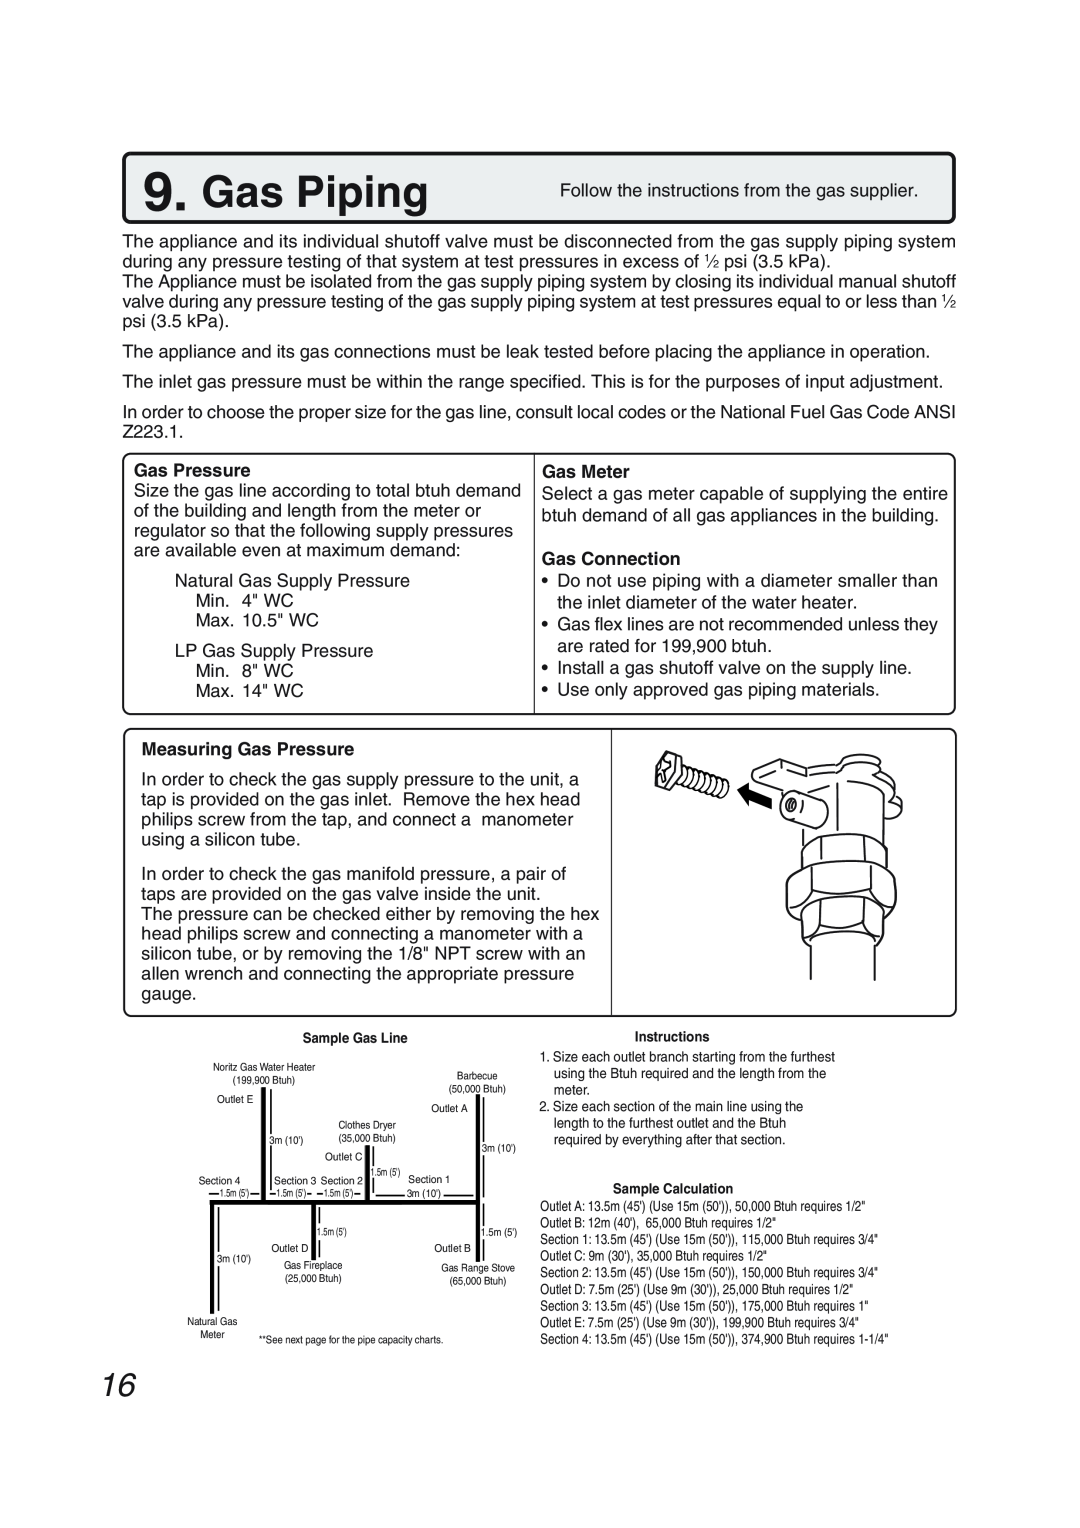 Pentax N-0751M-OD installation manual Gas Piping, Measuring Gas Pressure, Gas Meter, Gas Connection 